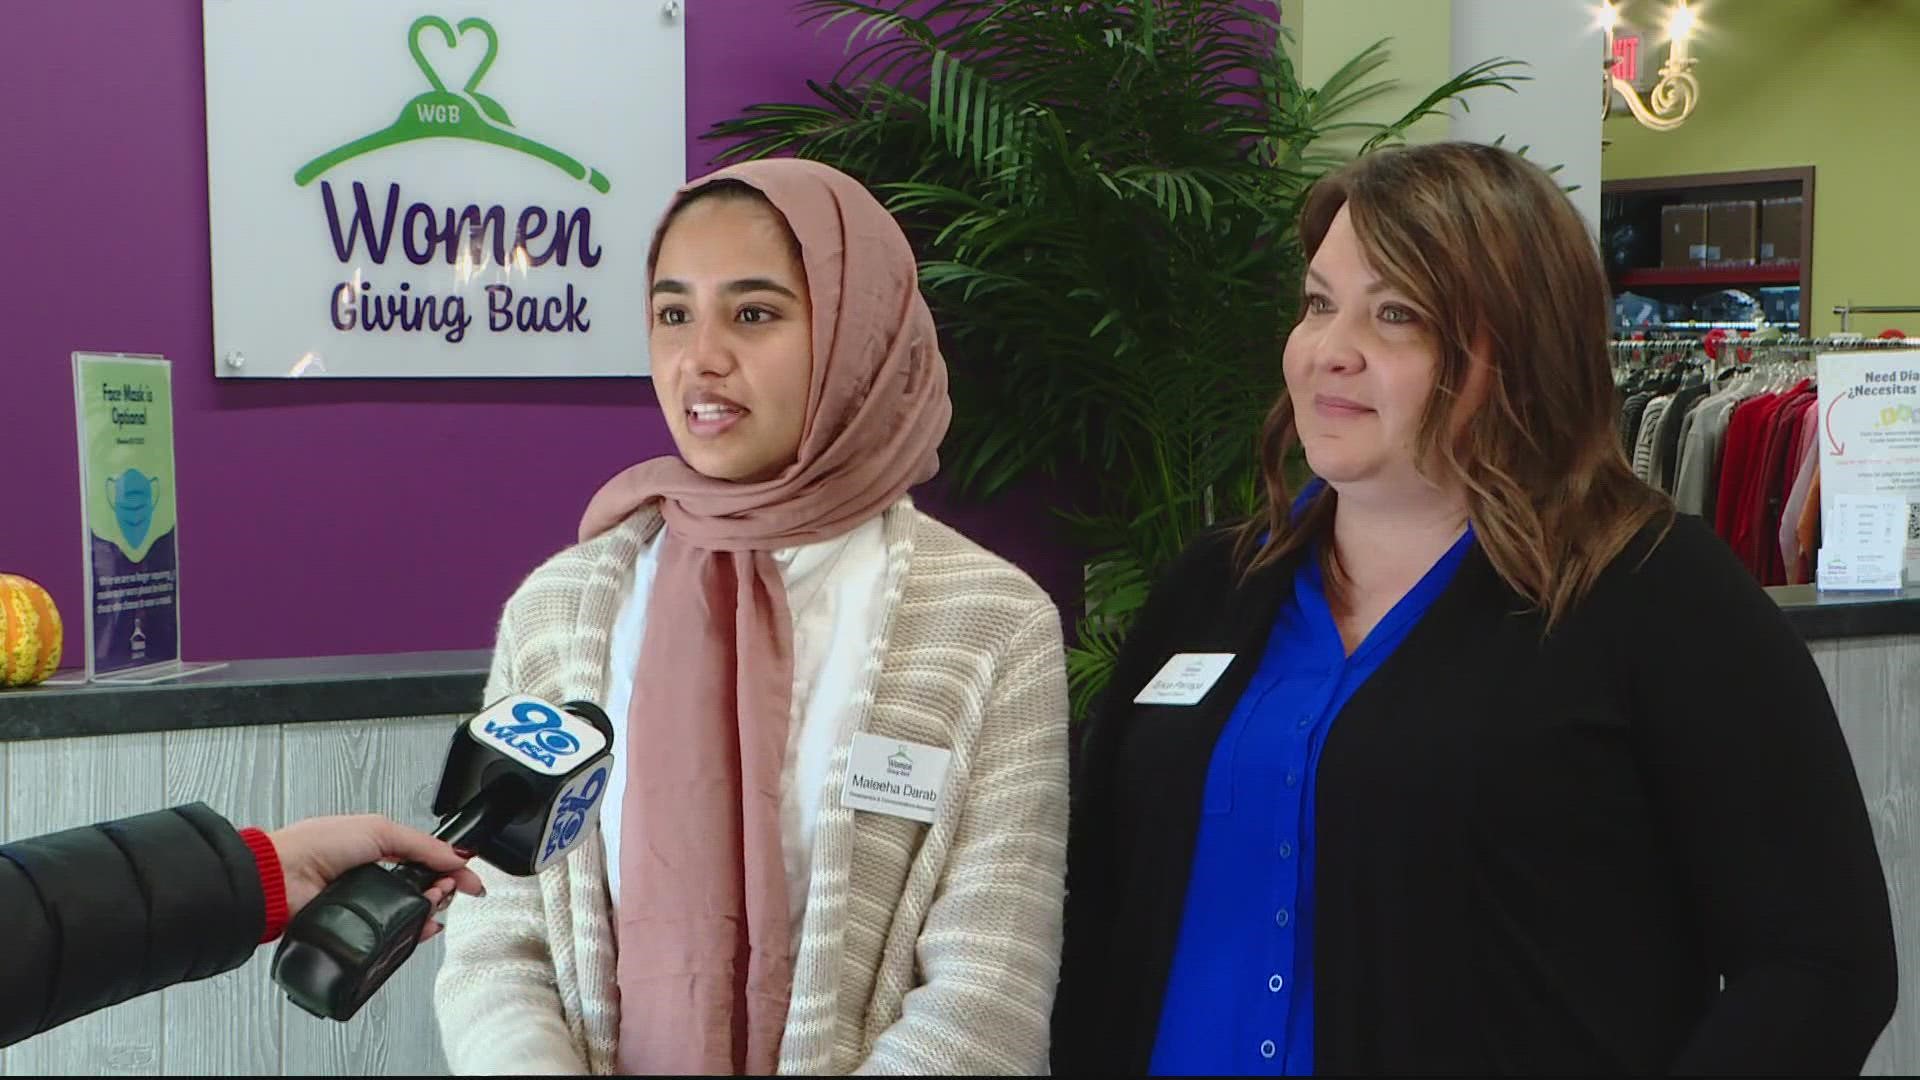 An organization called 'Women Giving Back' is collecting hijabs and coats to give out to some who could really use a helping hand right now.